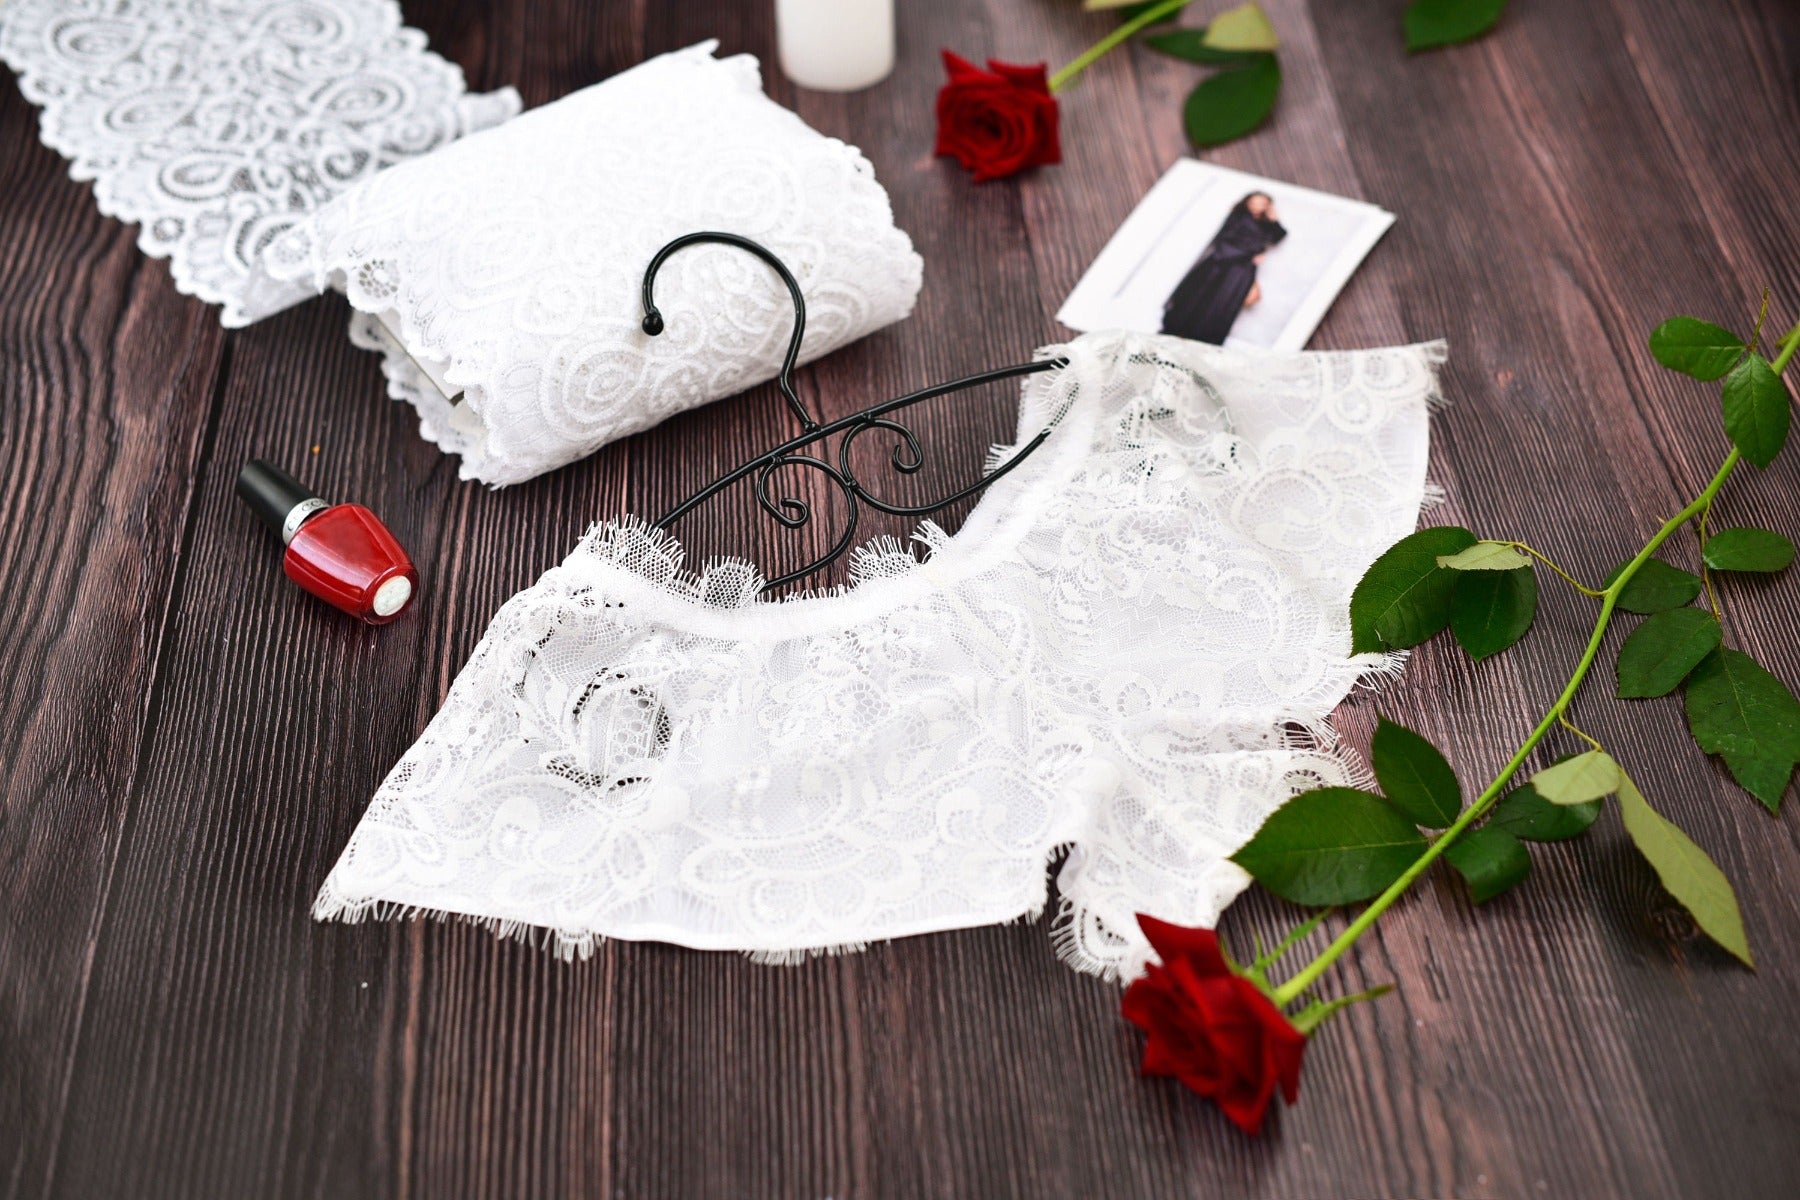 Whether it's your wedding night, honeymoon, or a special gift, these extra sexy lingerie pieces will make you feel truly irresistible